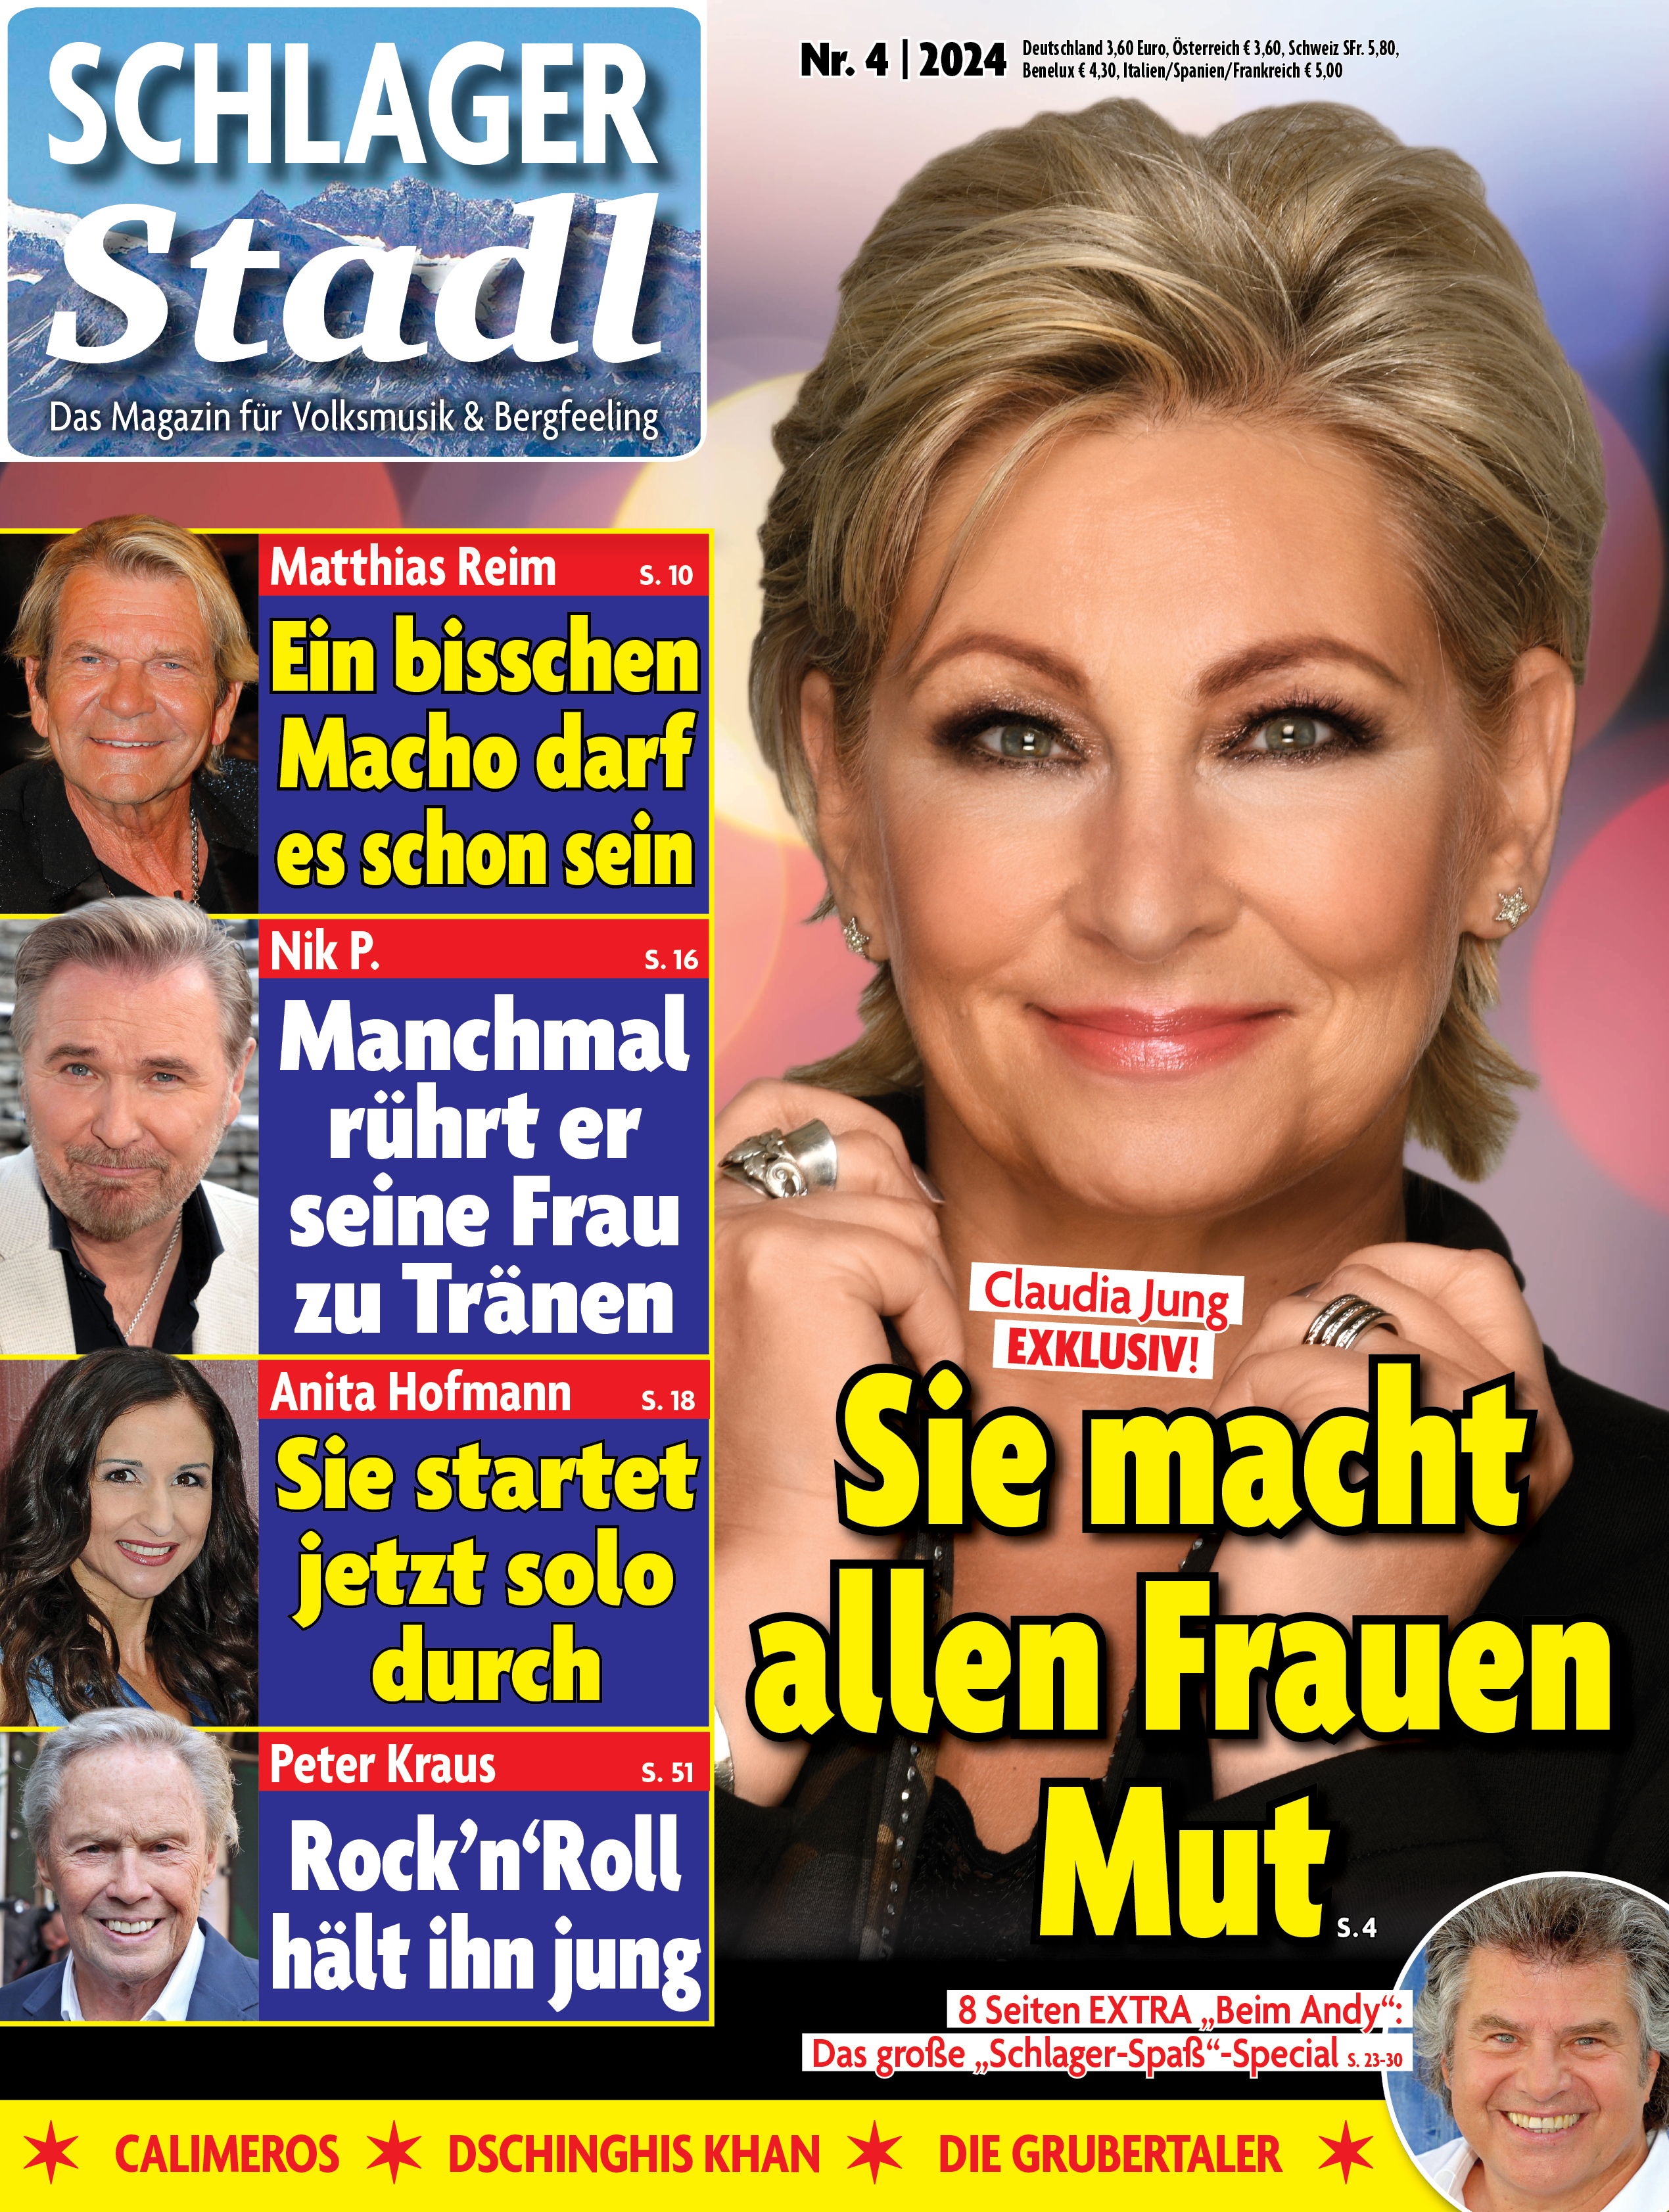 Schlager Stadl (Nr. 4 | 2024) – inkl. “Beim Andy” (mit Andy Borg)